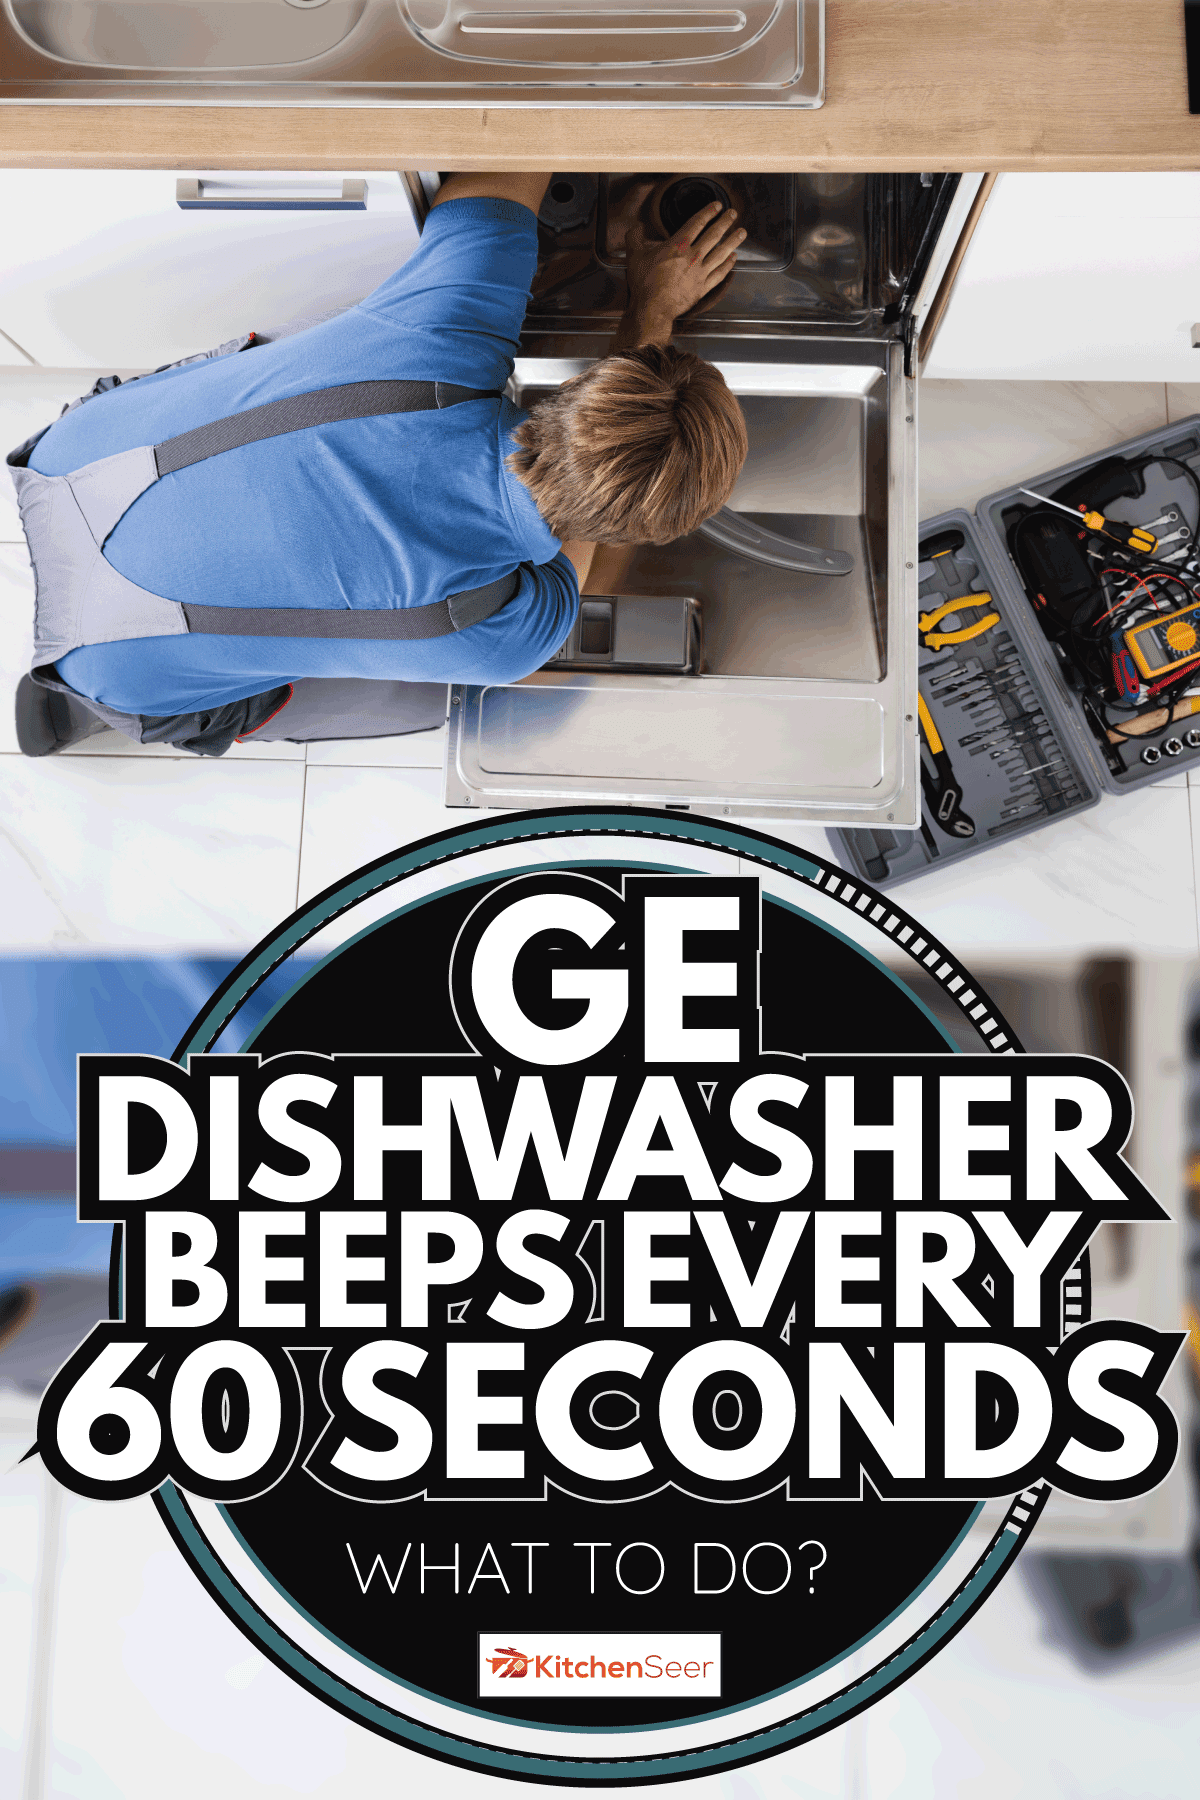 Man Repairing Dishwasher. GE Dishwasher Beeps Every 60 Seconds—What To Do